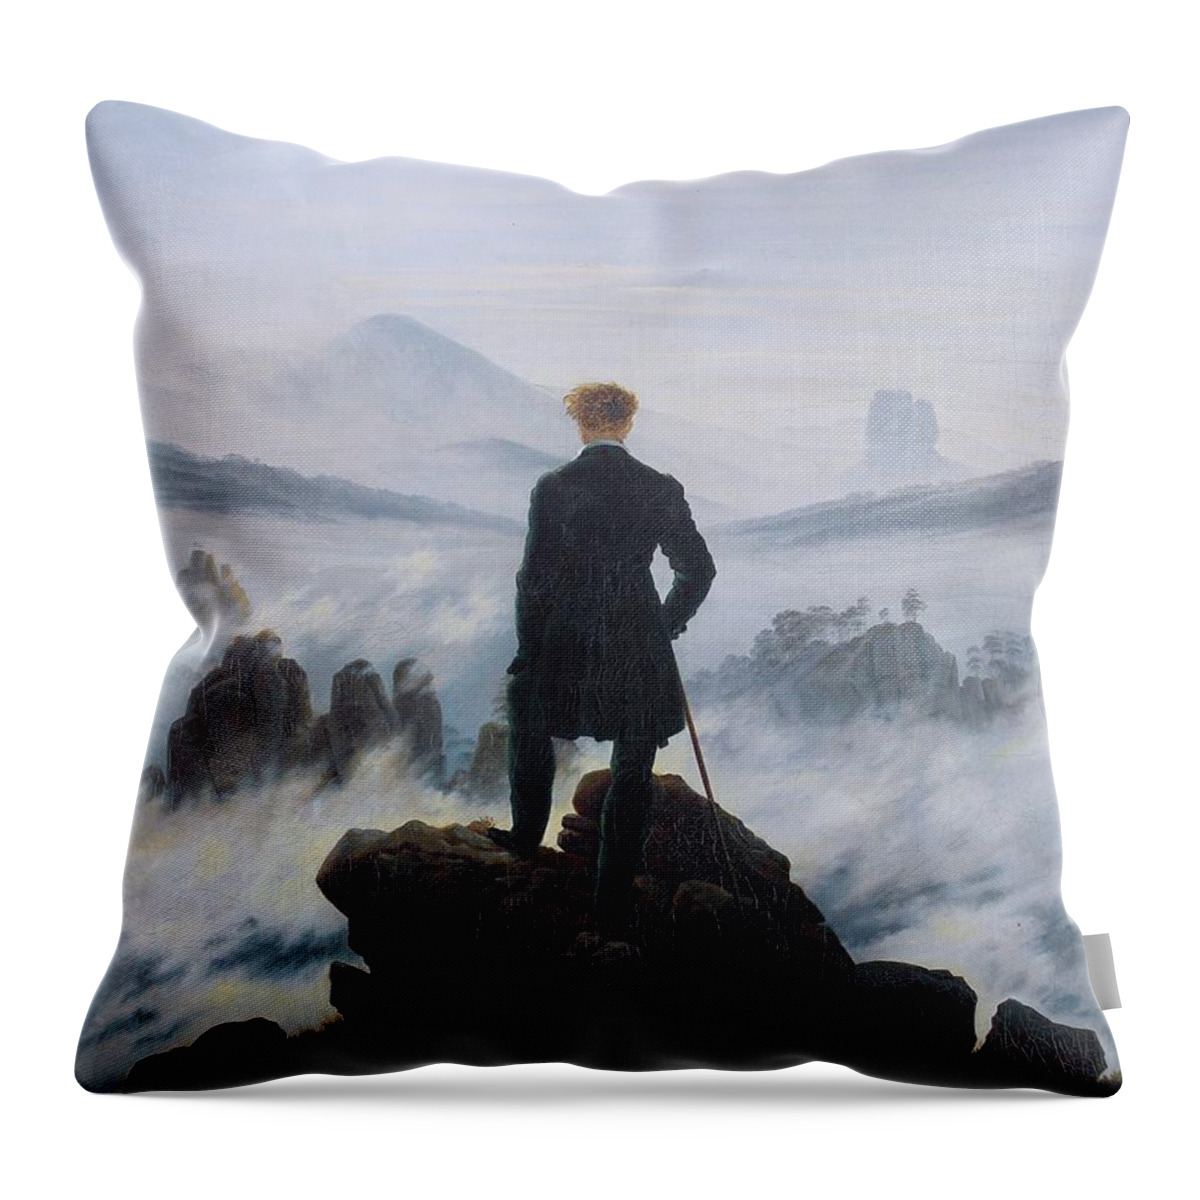 Caspar David Friedrich Throw Pillow featuring the painting Wanderer Above The Sea Of Fog by Caspar David Friedrich